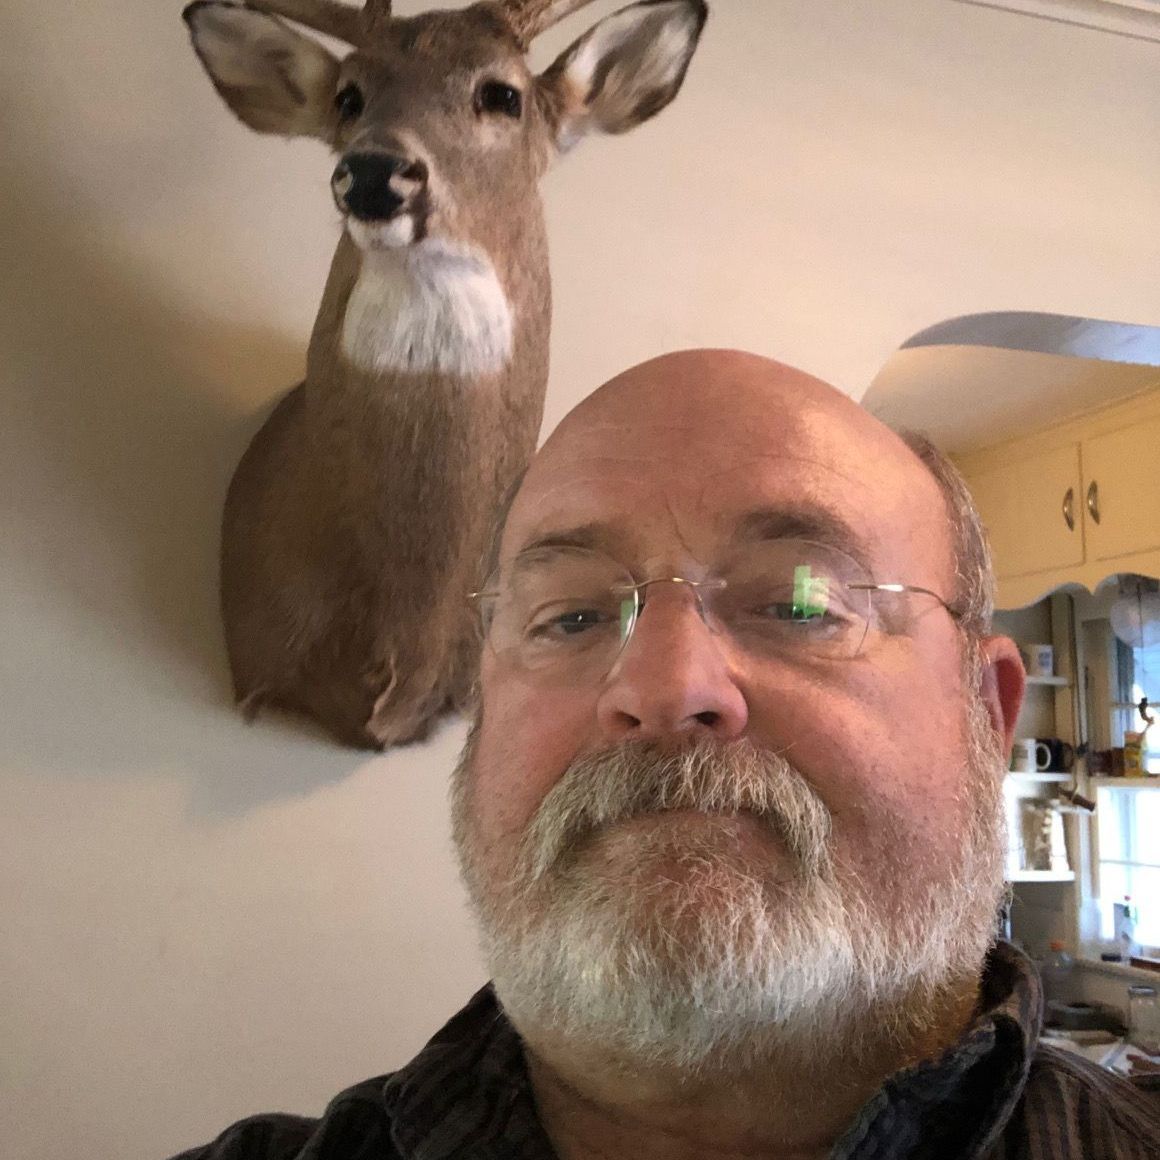 a man with glasses stands in front of a stuffed deer on a wall